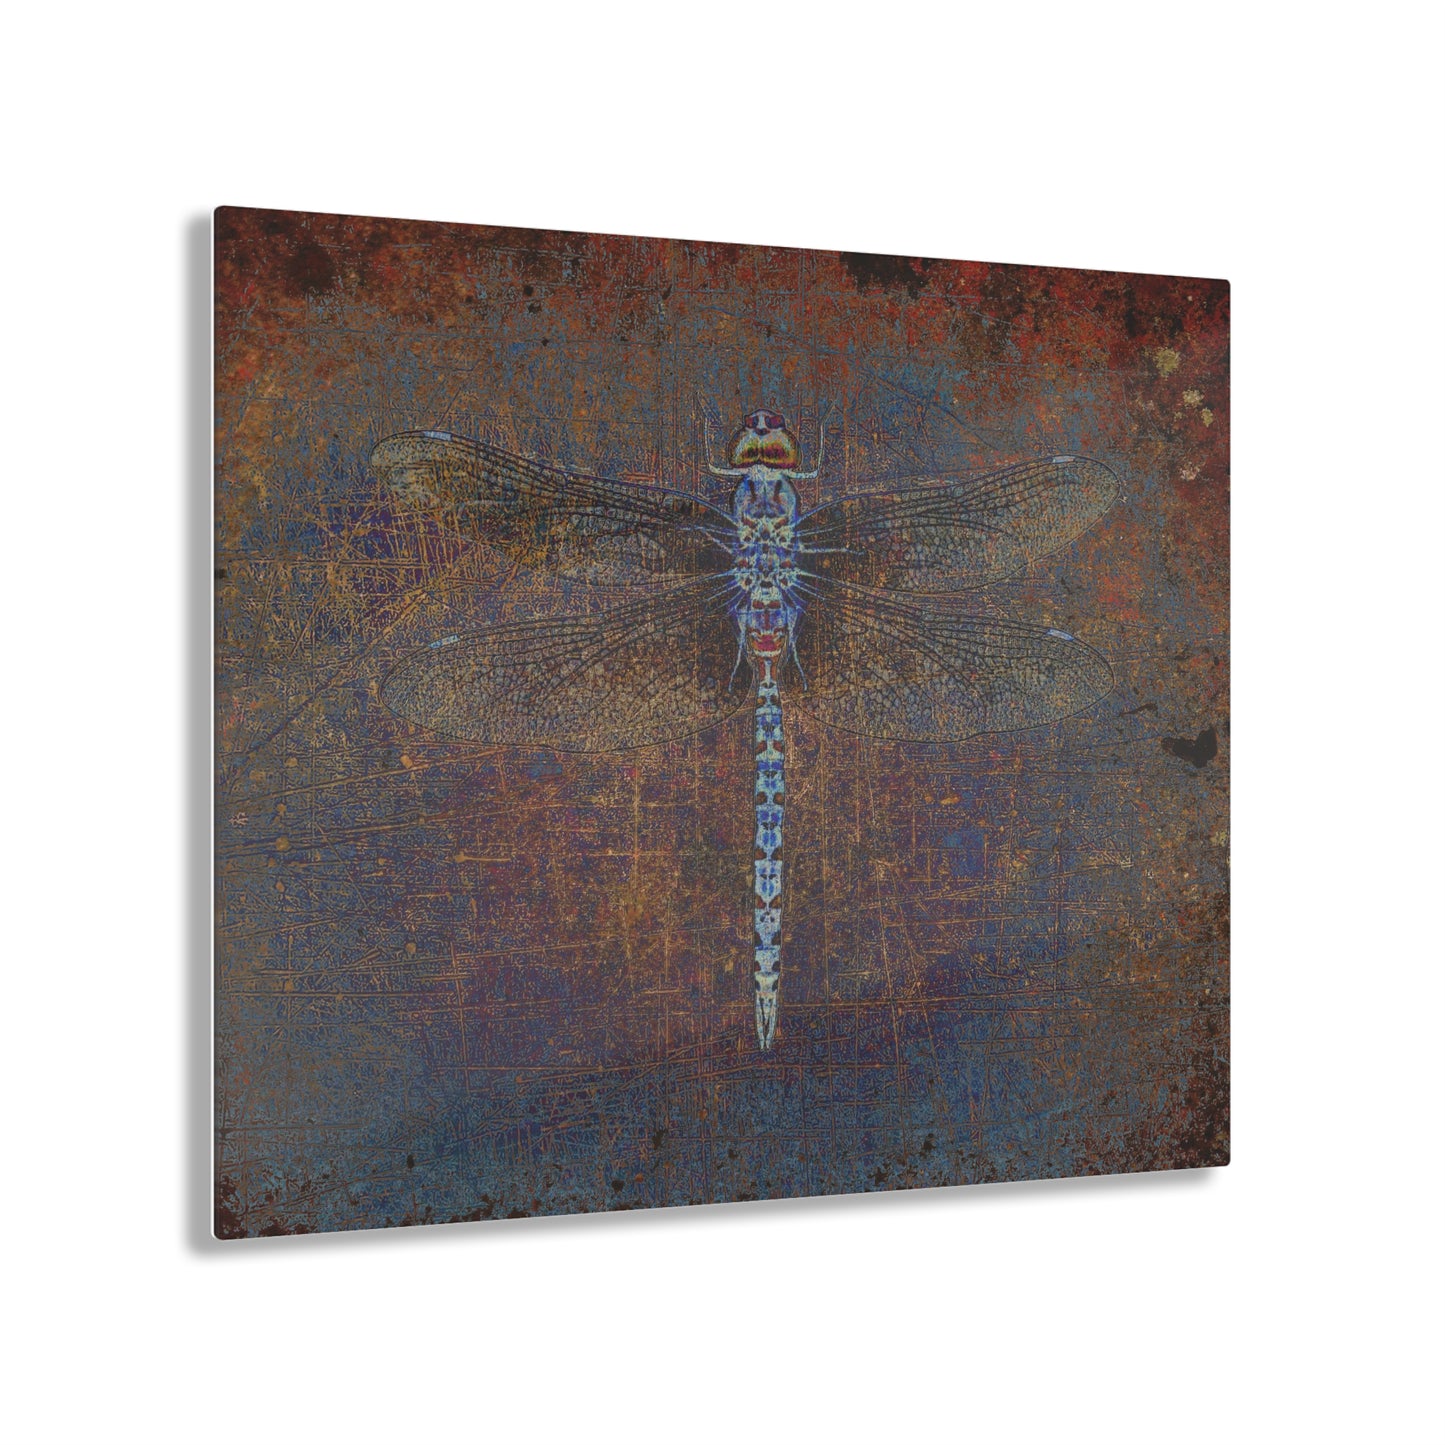 Dragonfly on Distressed Purple and Orange Background Print on a Crystal Clear Acrylic Panel 20x16